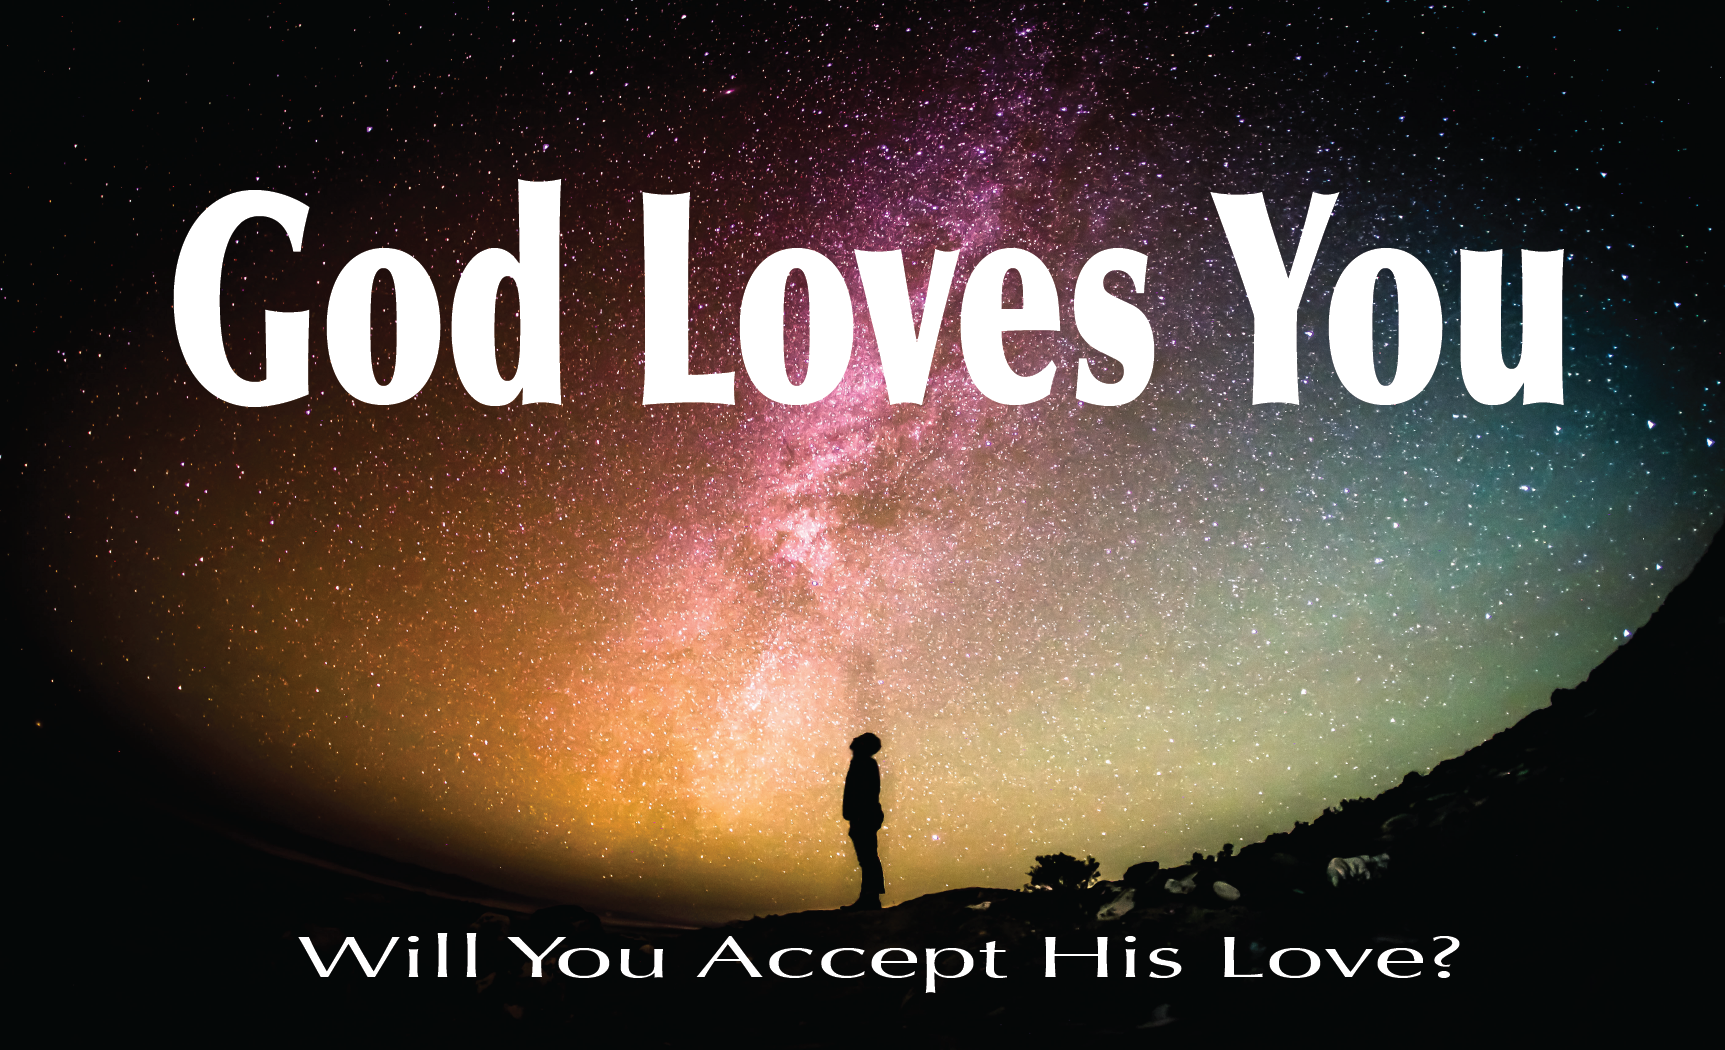 God Loves You – Will You Accept His Love?